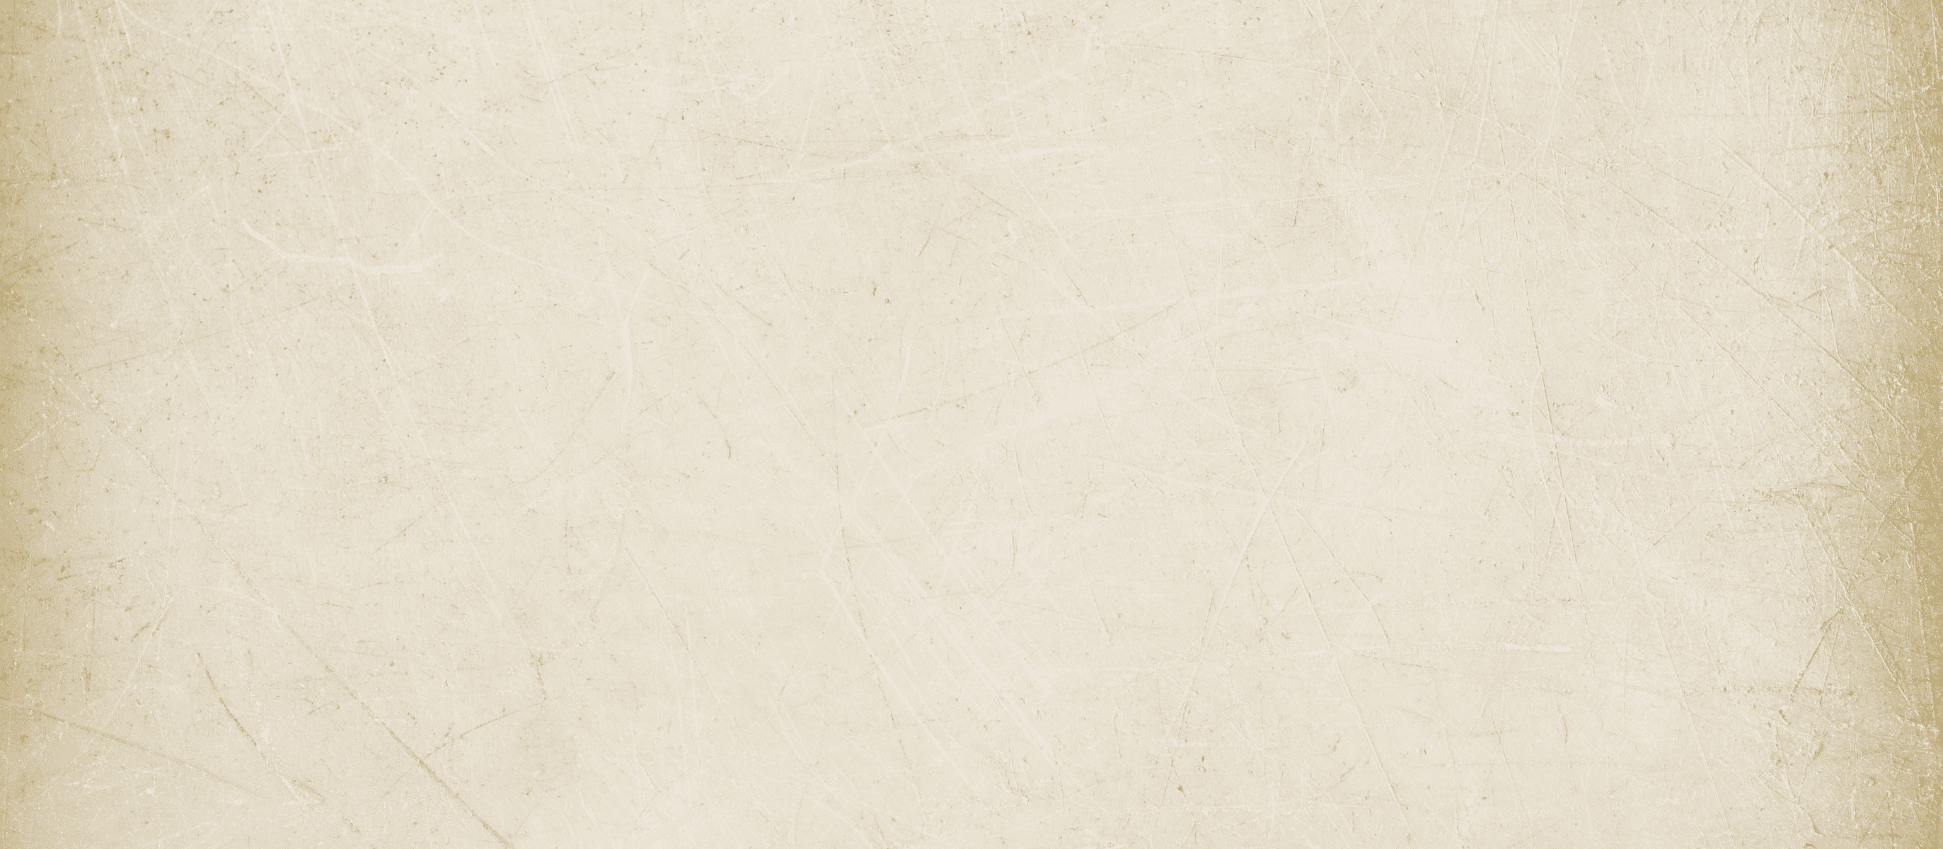 pastel-yellow-vignette-concrete-textured-background footer